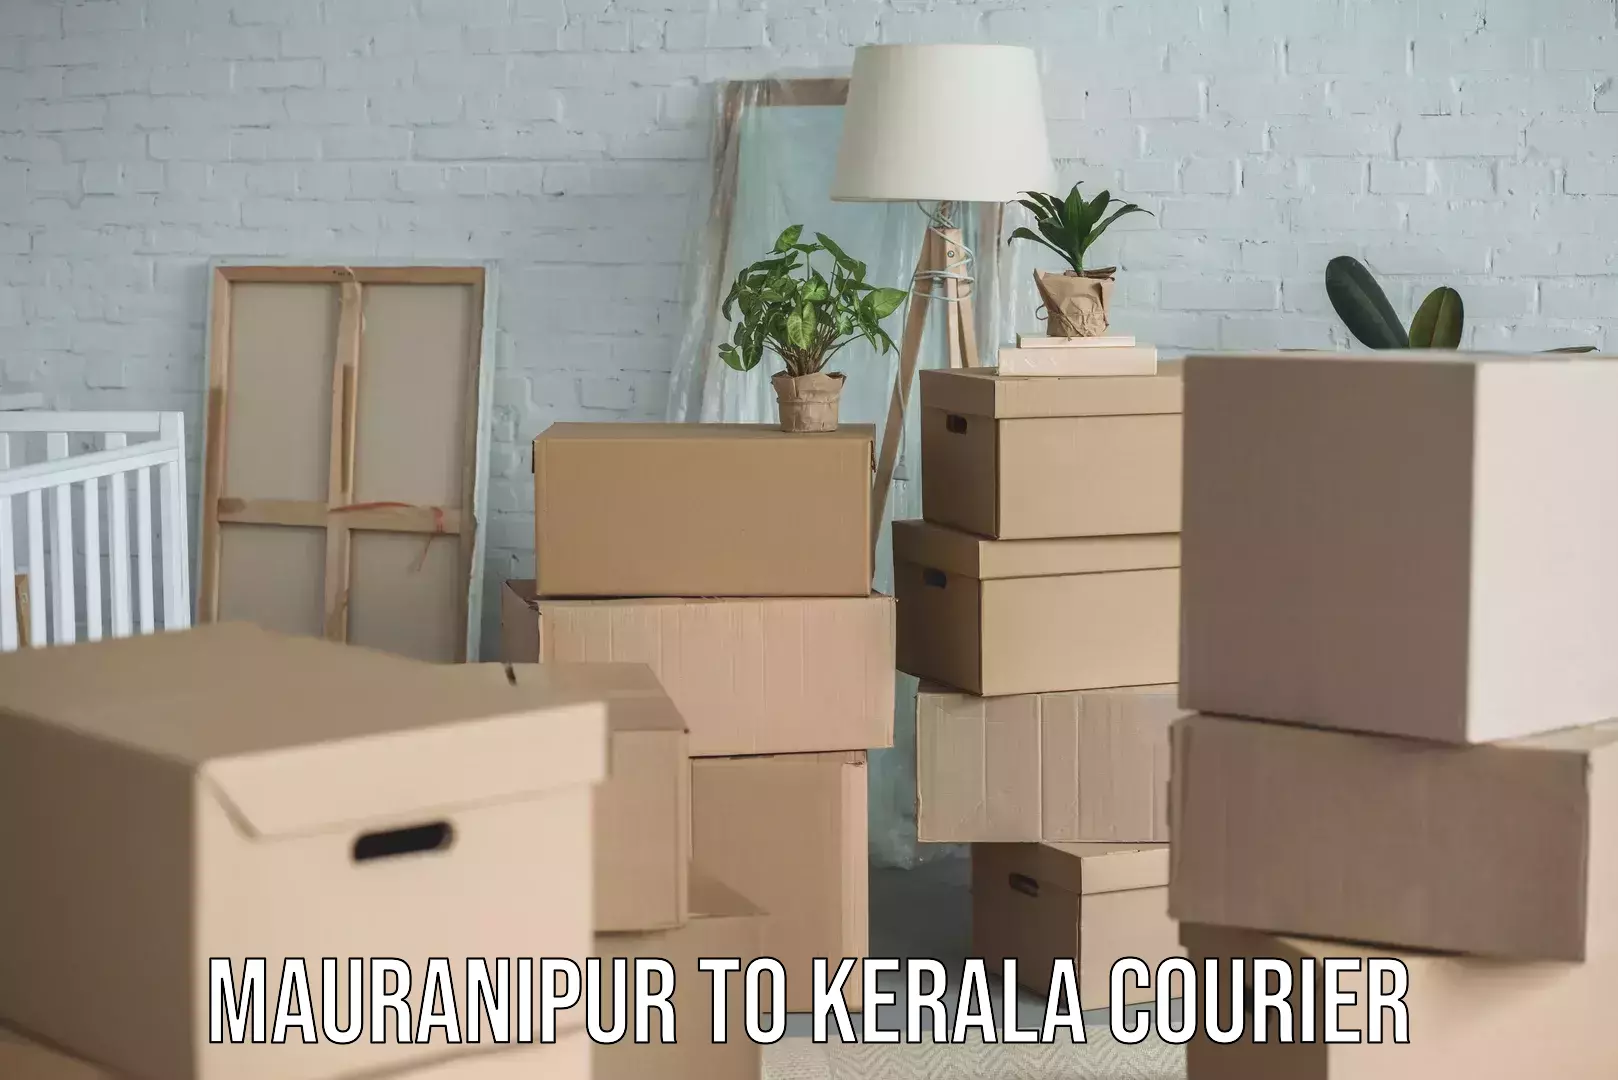 Home moving specialists Mauranipur to Kerala